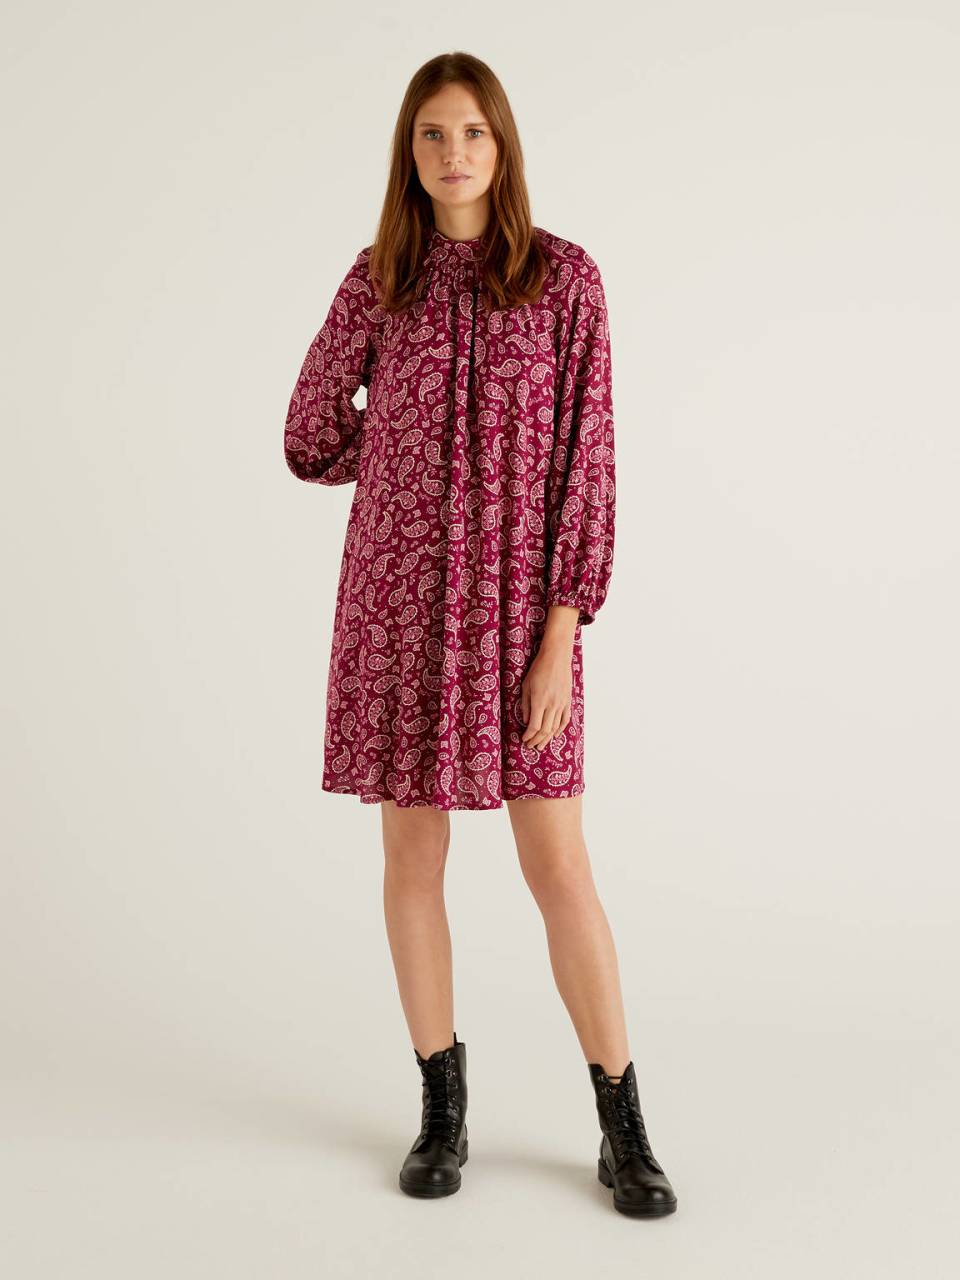 Benetton Patterned dress in sustainable viscose. 1